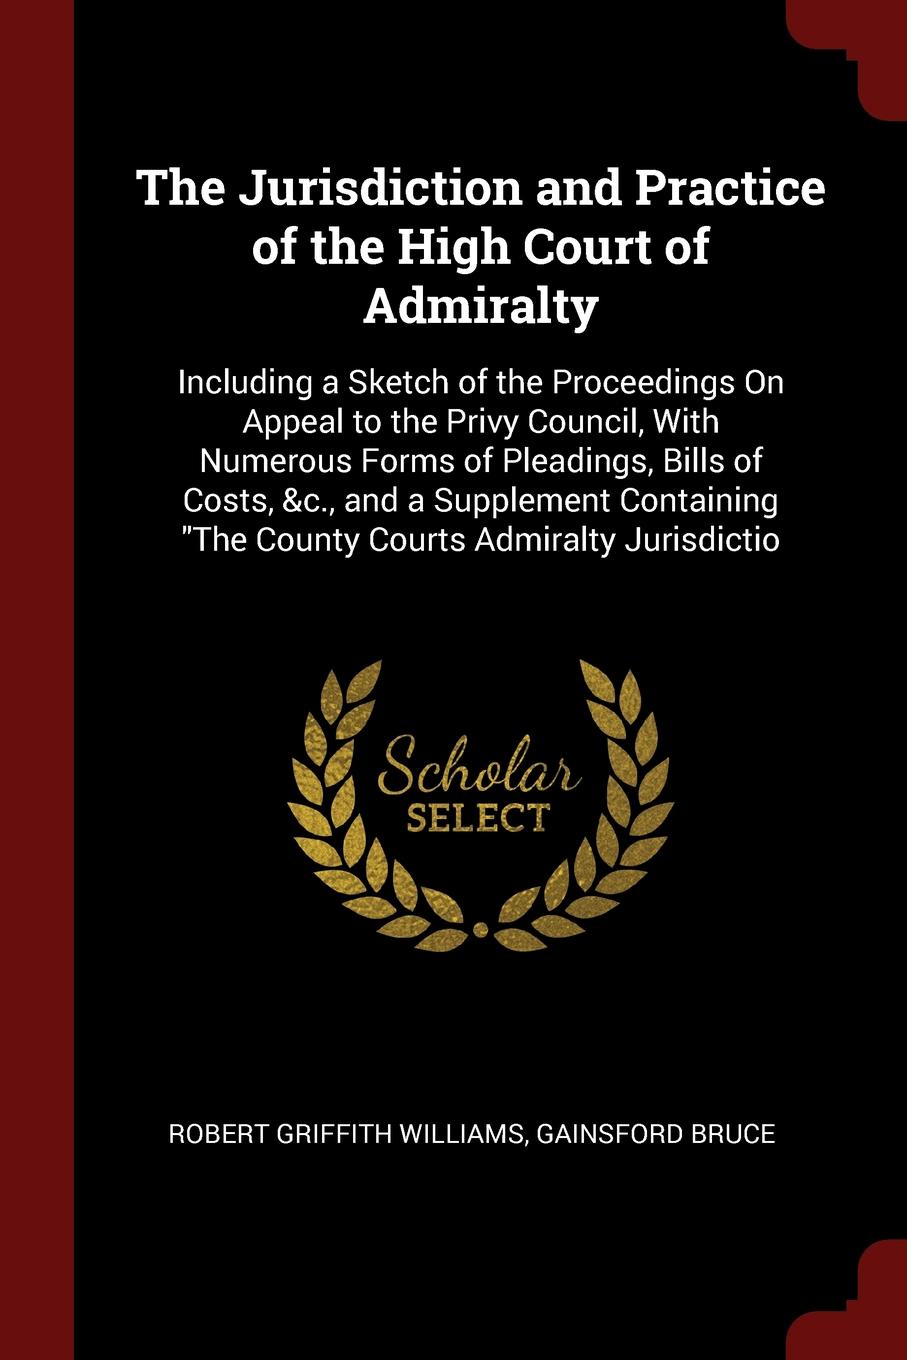 The Jurisdiction and Practice of the High Court of Admiralty. Including a Sketch of the Proceedings On Appeal to the Privy Council, With Numerous Forms of Pleadings, Bills of Costs, &c., and a Supplement Containing \